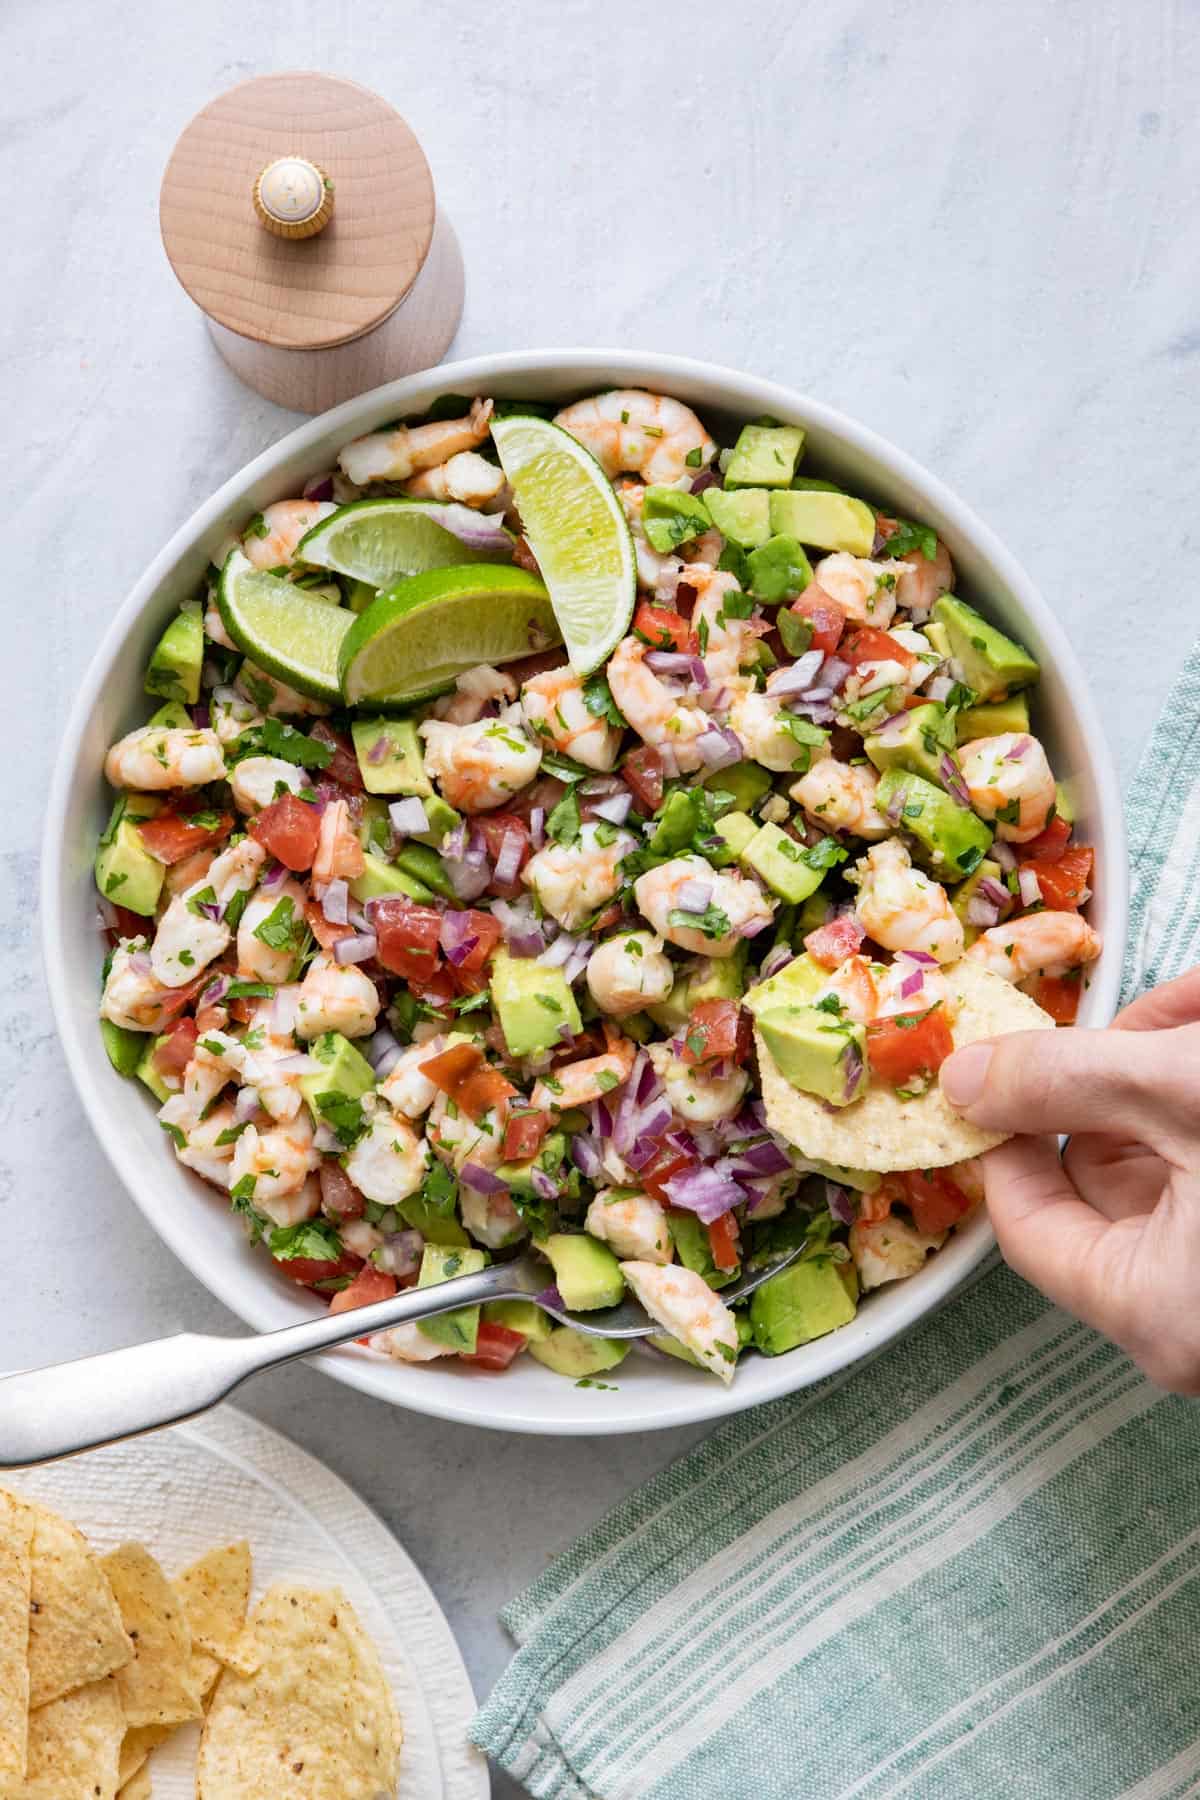 Large serving bowl of Shrimp avocado salsa with hand taking out a bite on a tortilla chip.